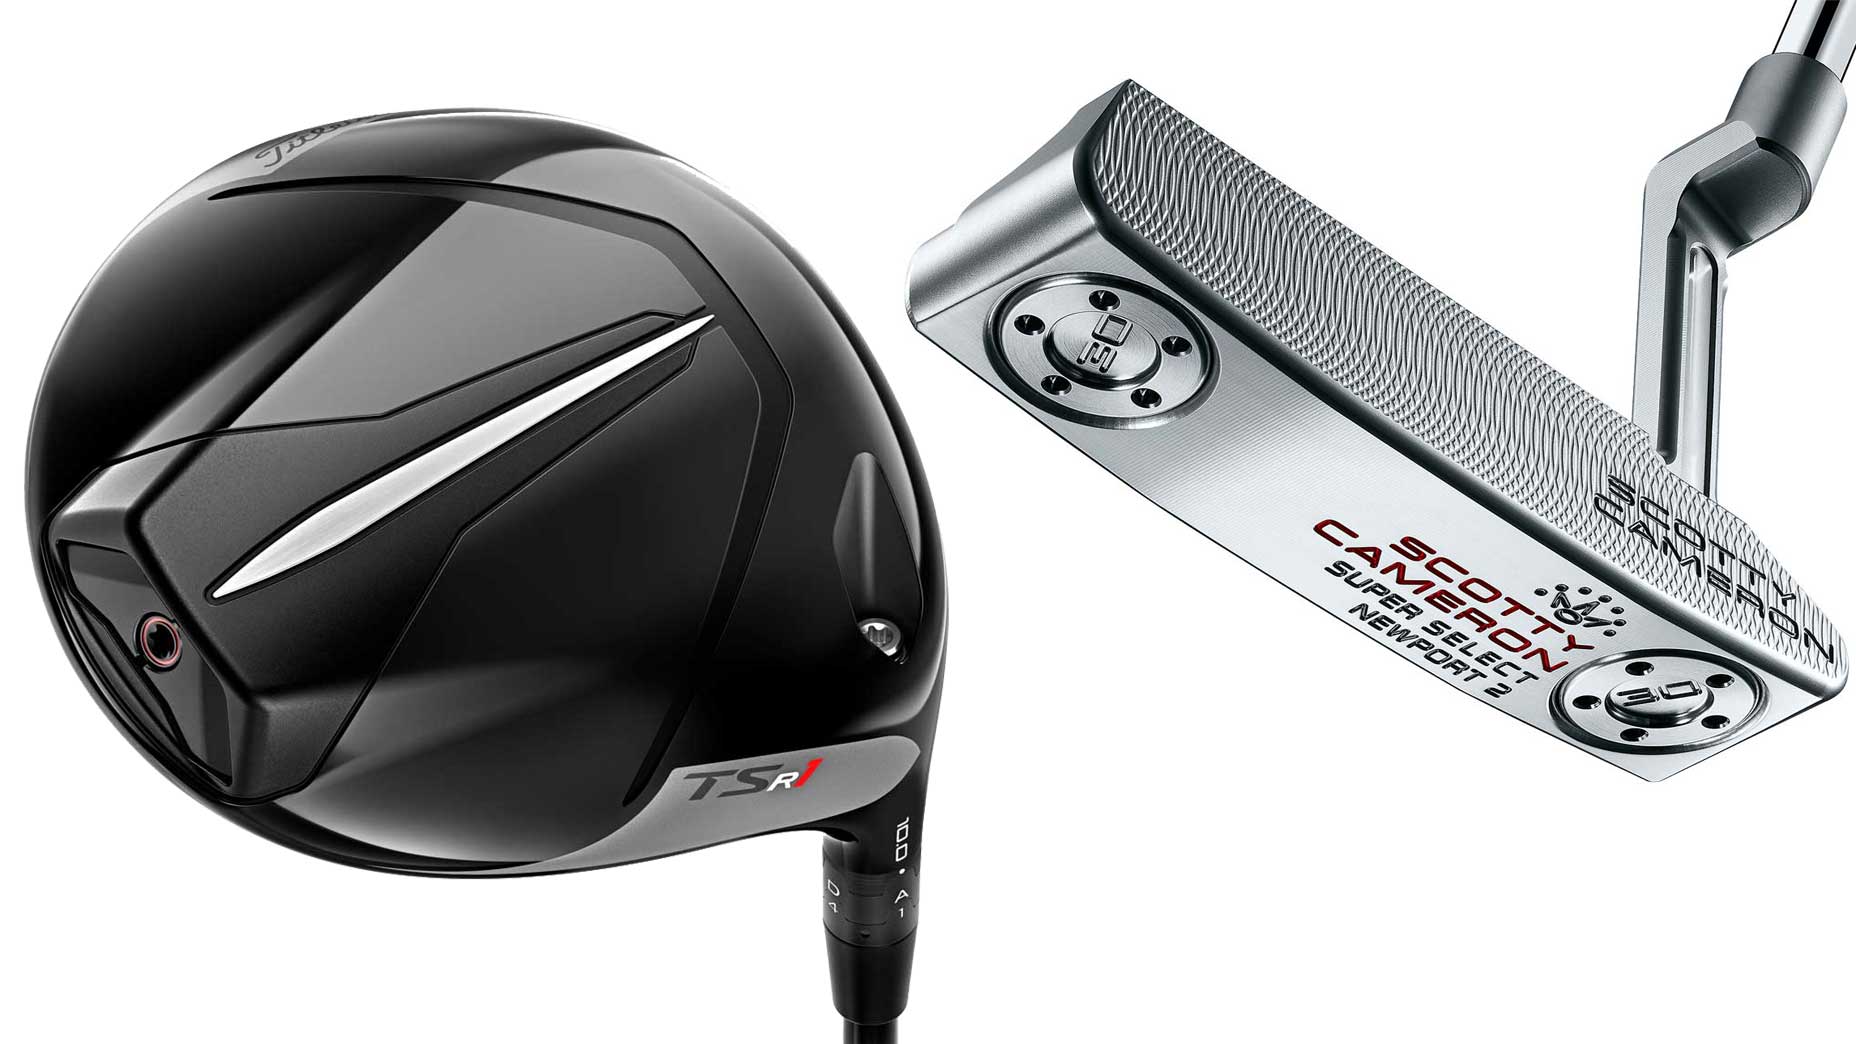 New Titleist golf clubs for 2023 (drivers, woods, hybrids, putters